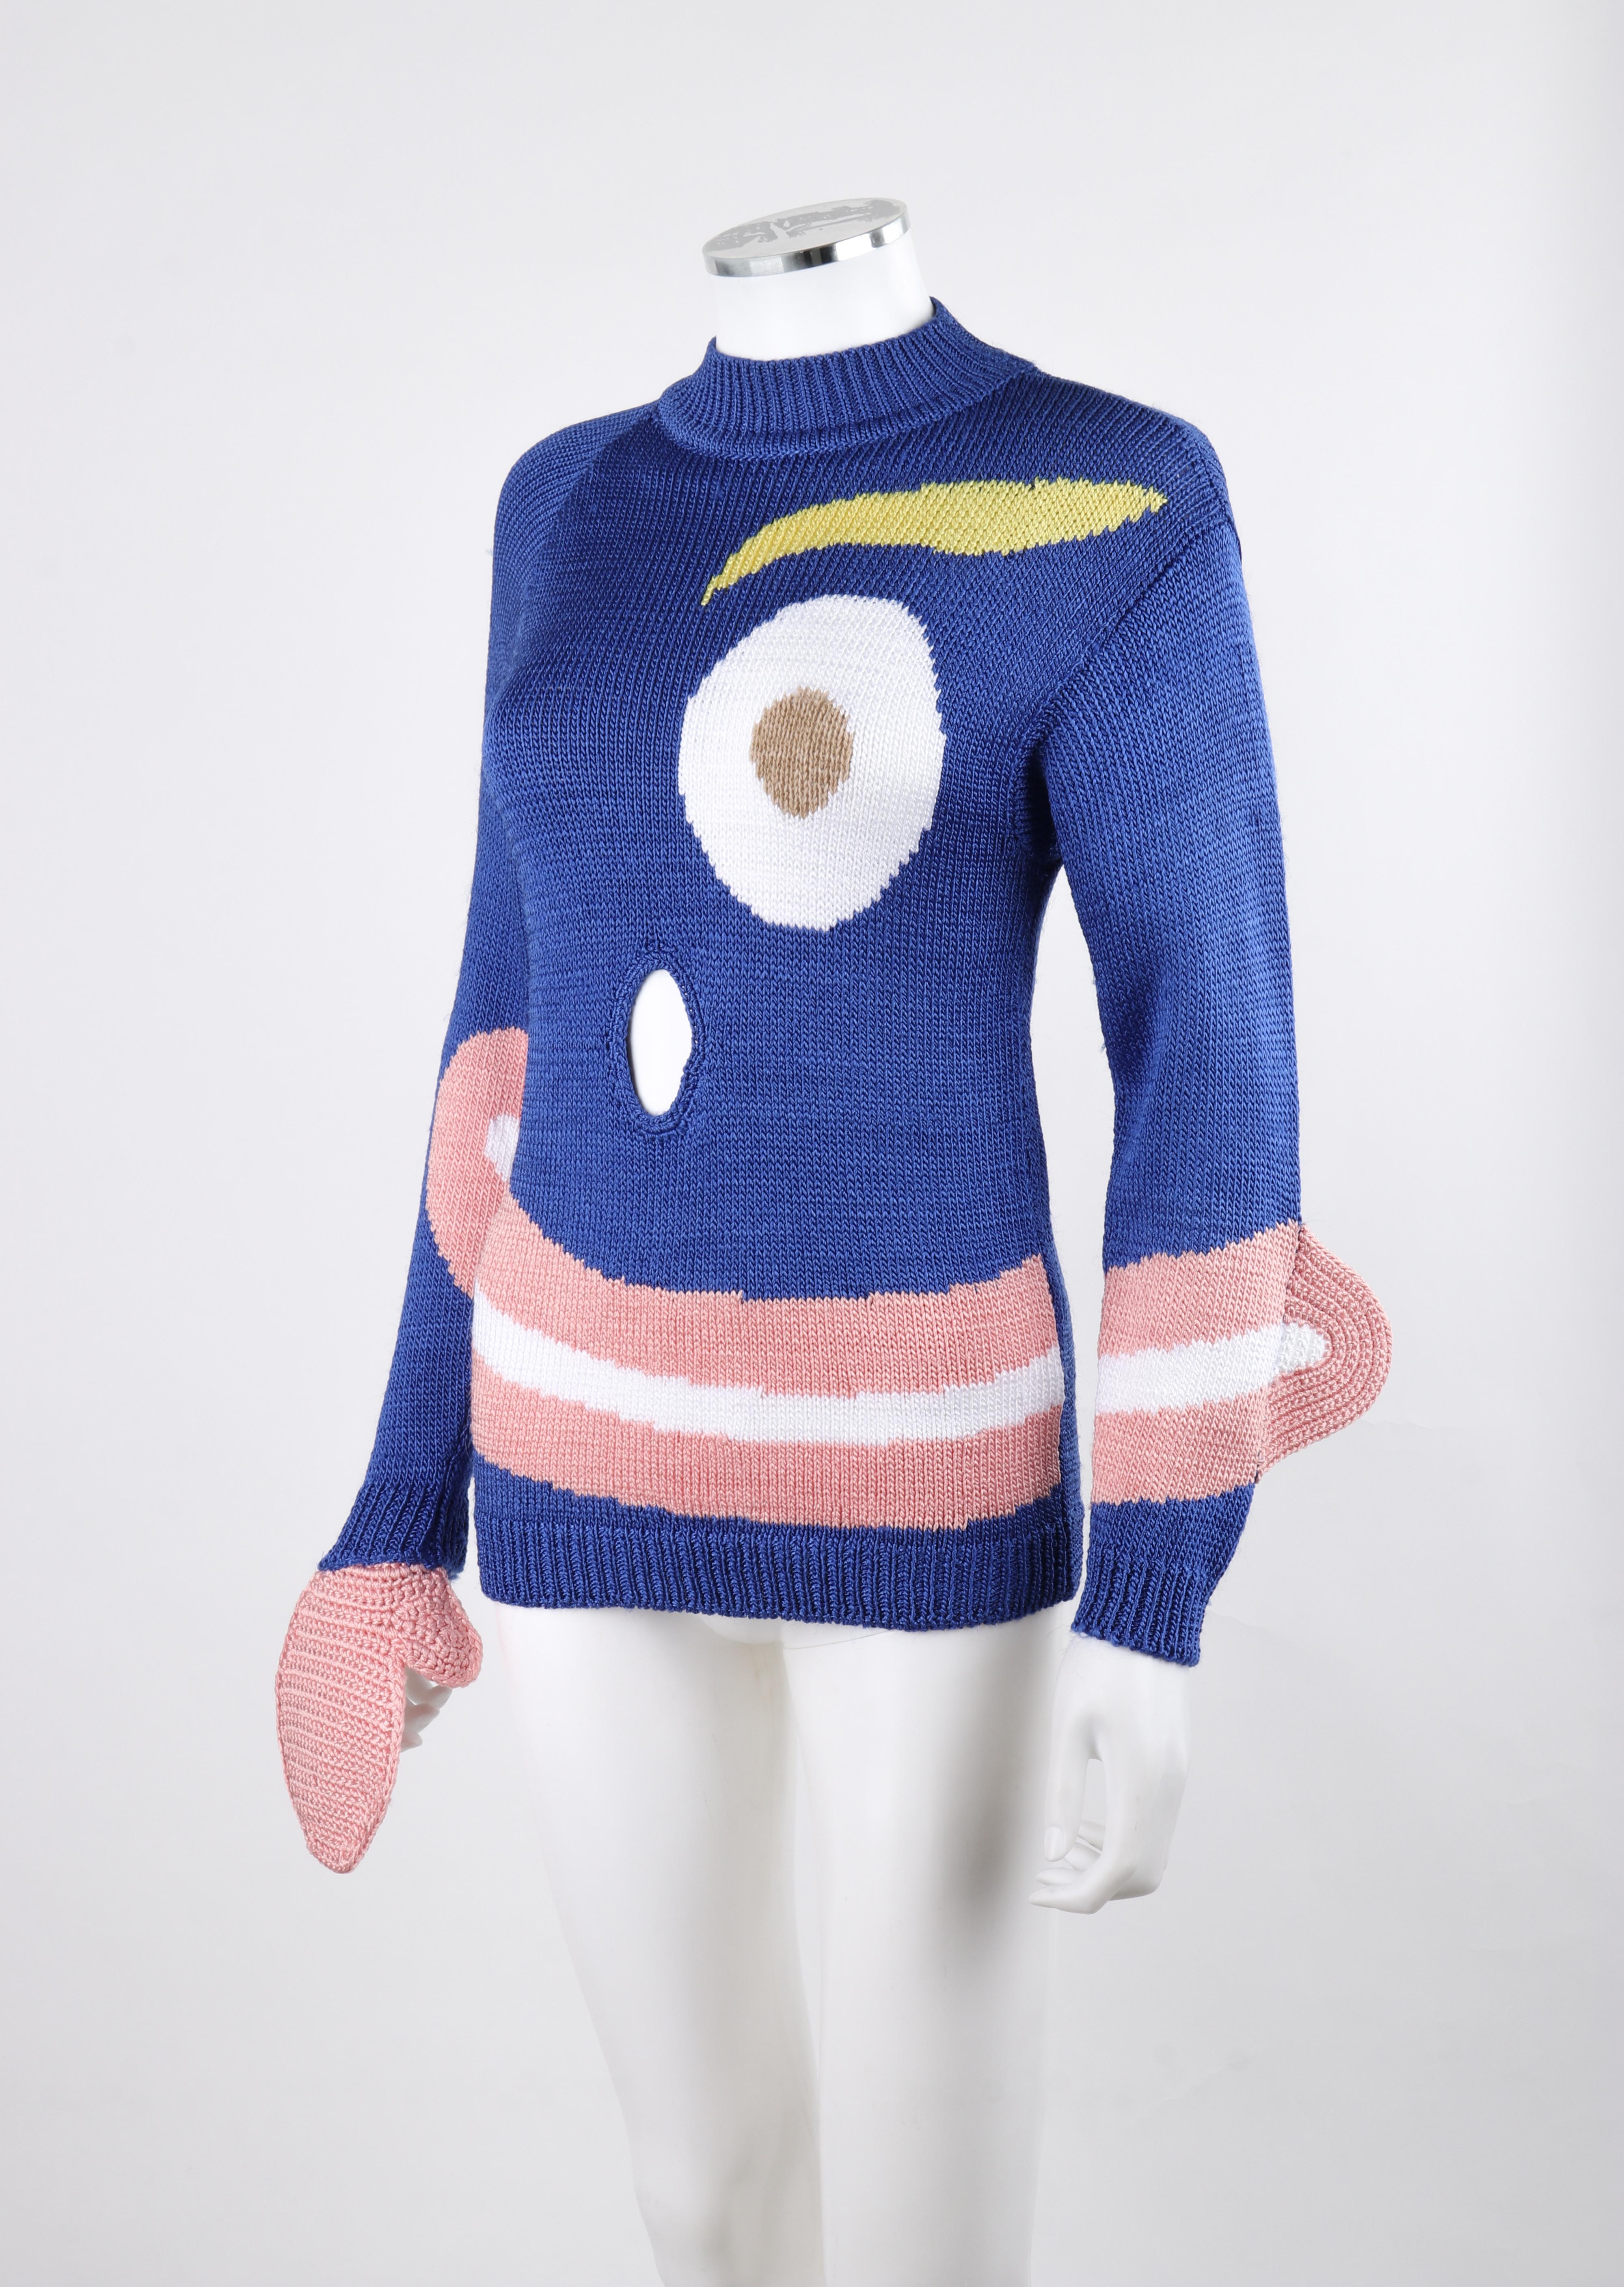 SURVIVAL OF THE FASHIONEST S/S 2020 Pull-over en tricot bleu Smiley Face Pull-over Top S en vente 5